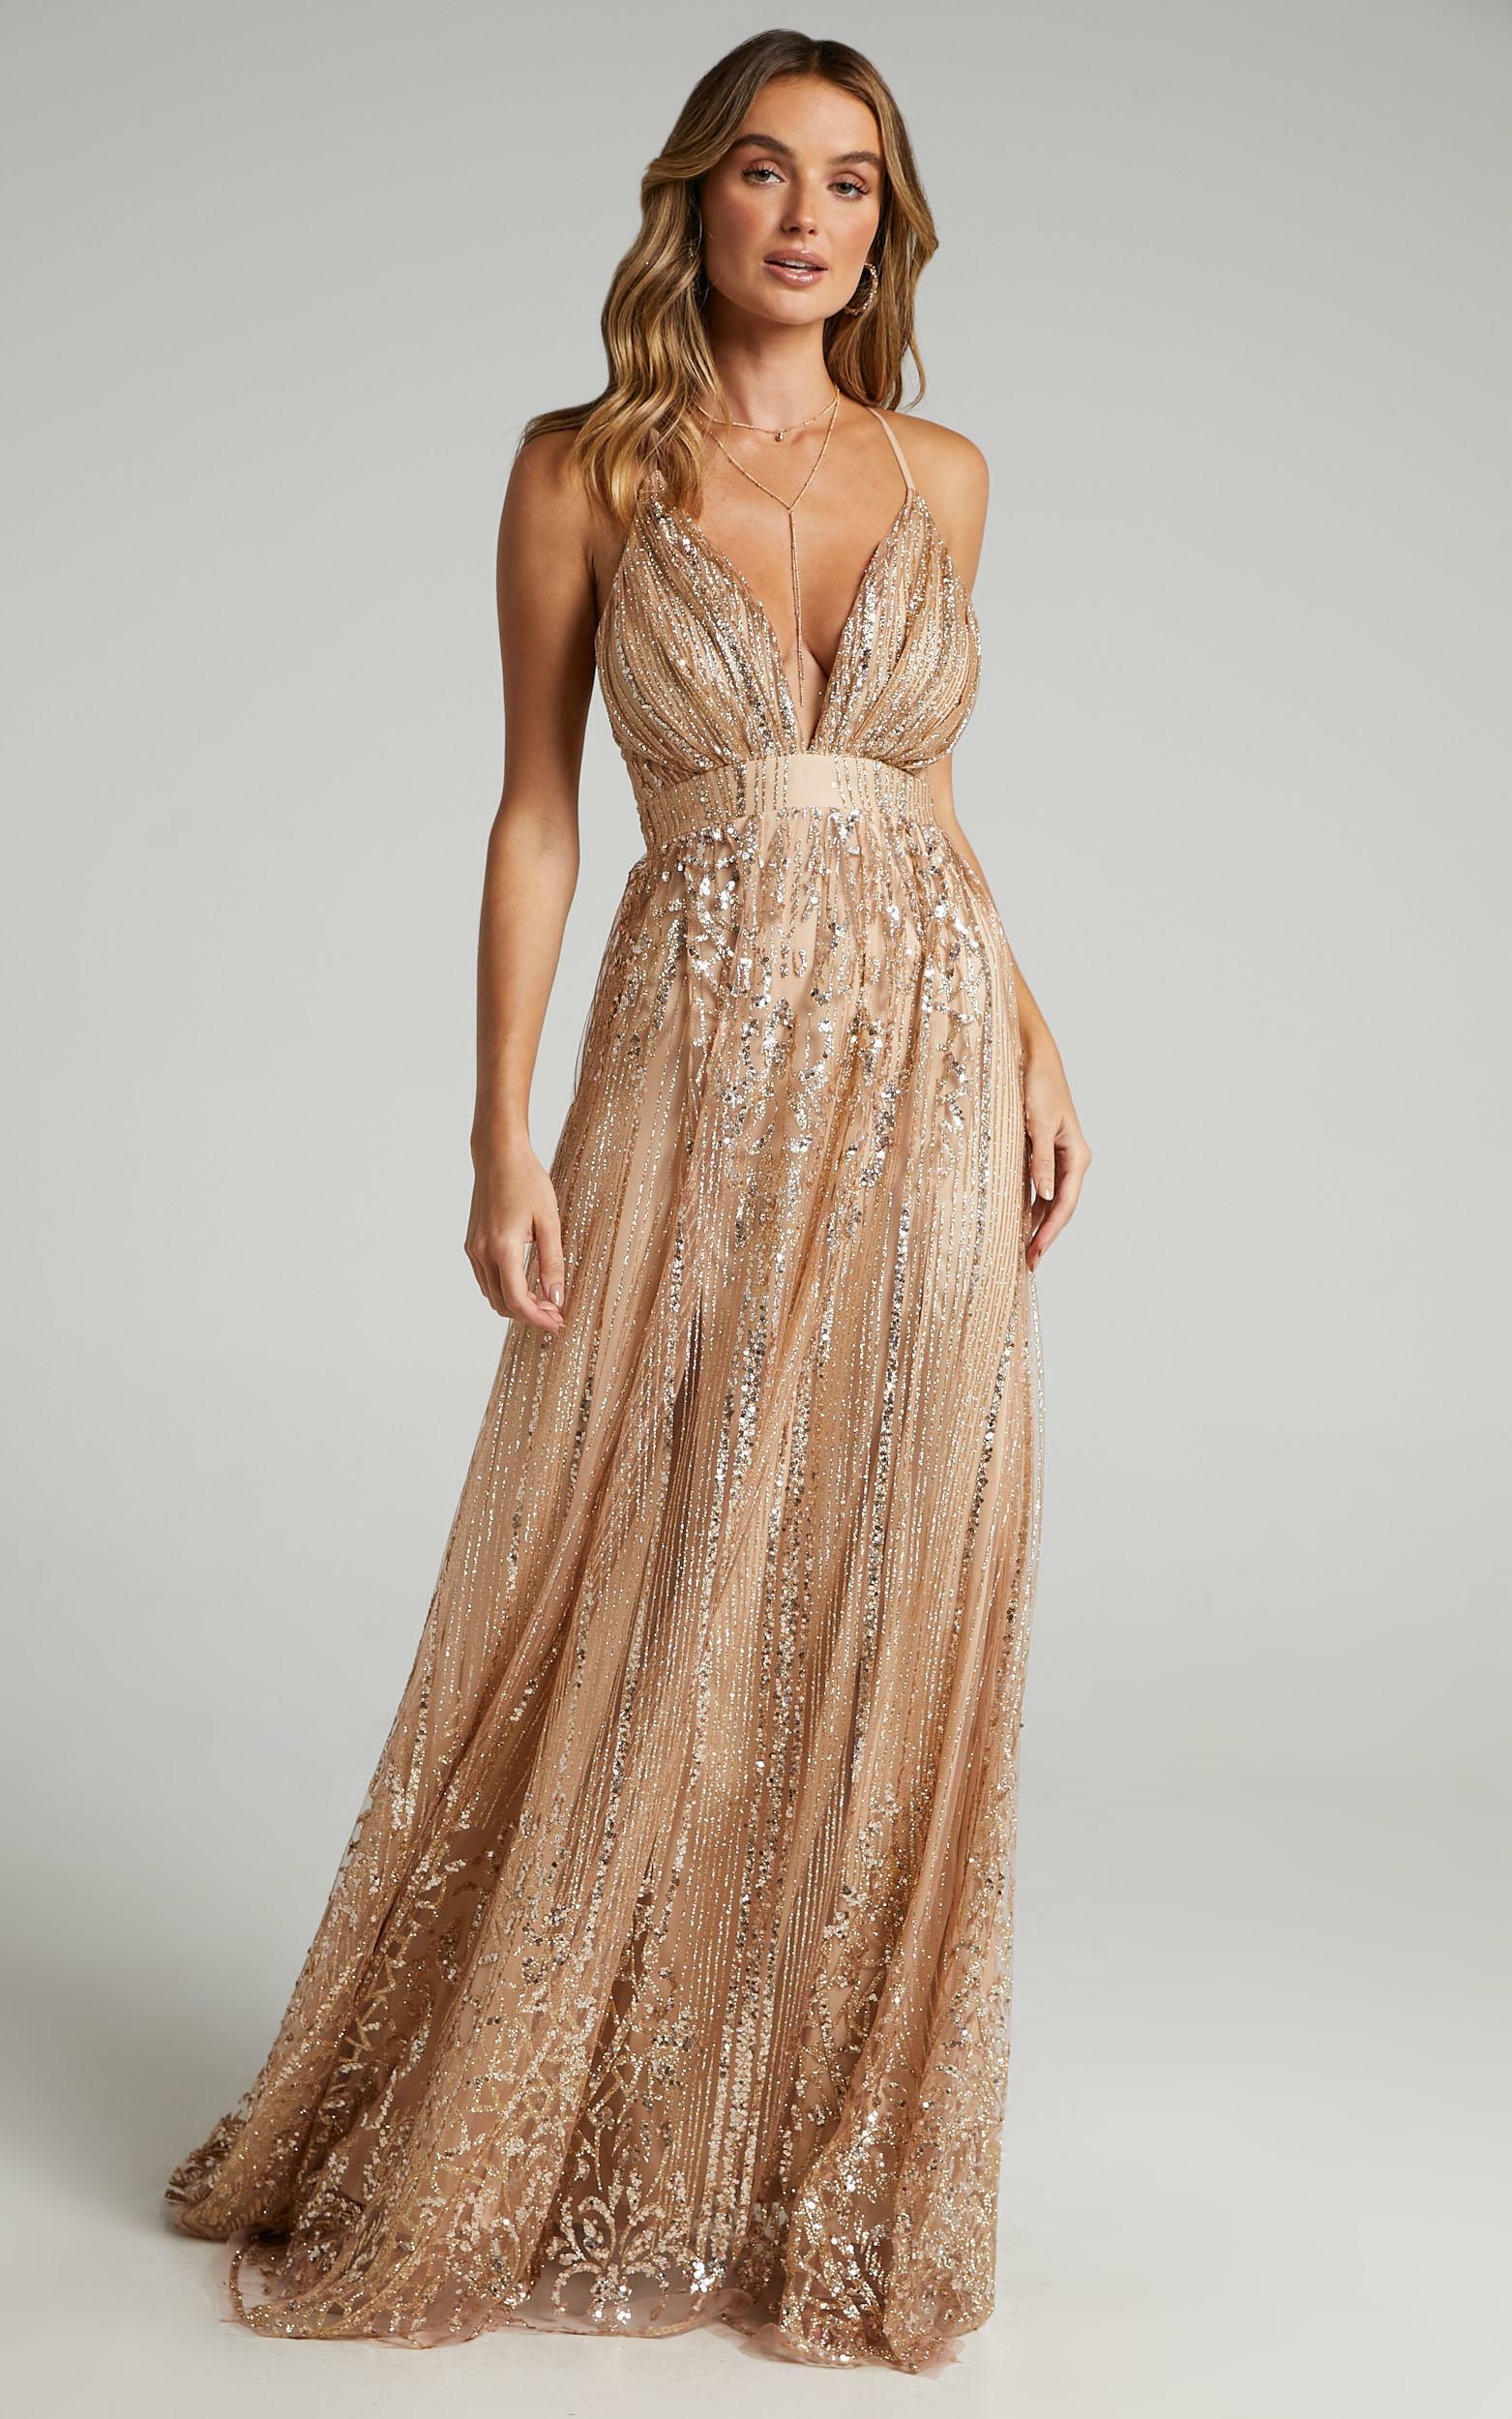 Start Strong Maxi Dress in Rose Gold - 06, RSG1, hi-res image number null